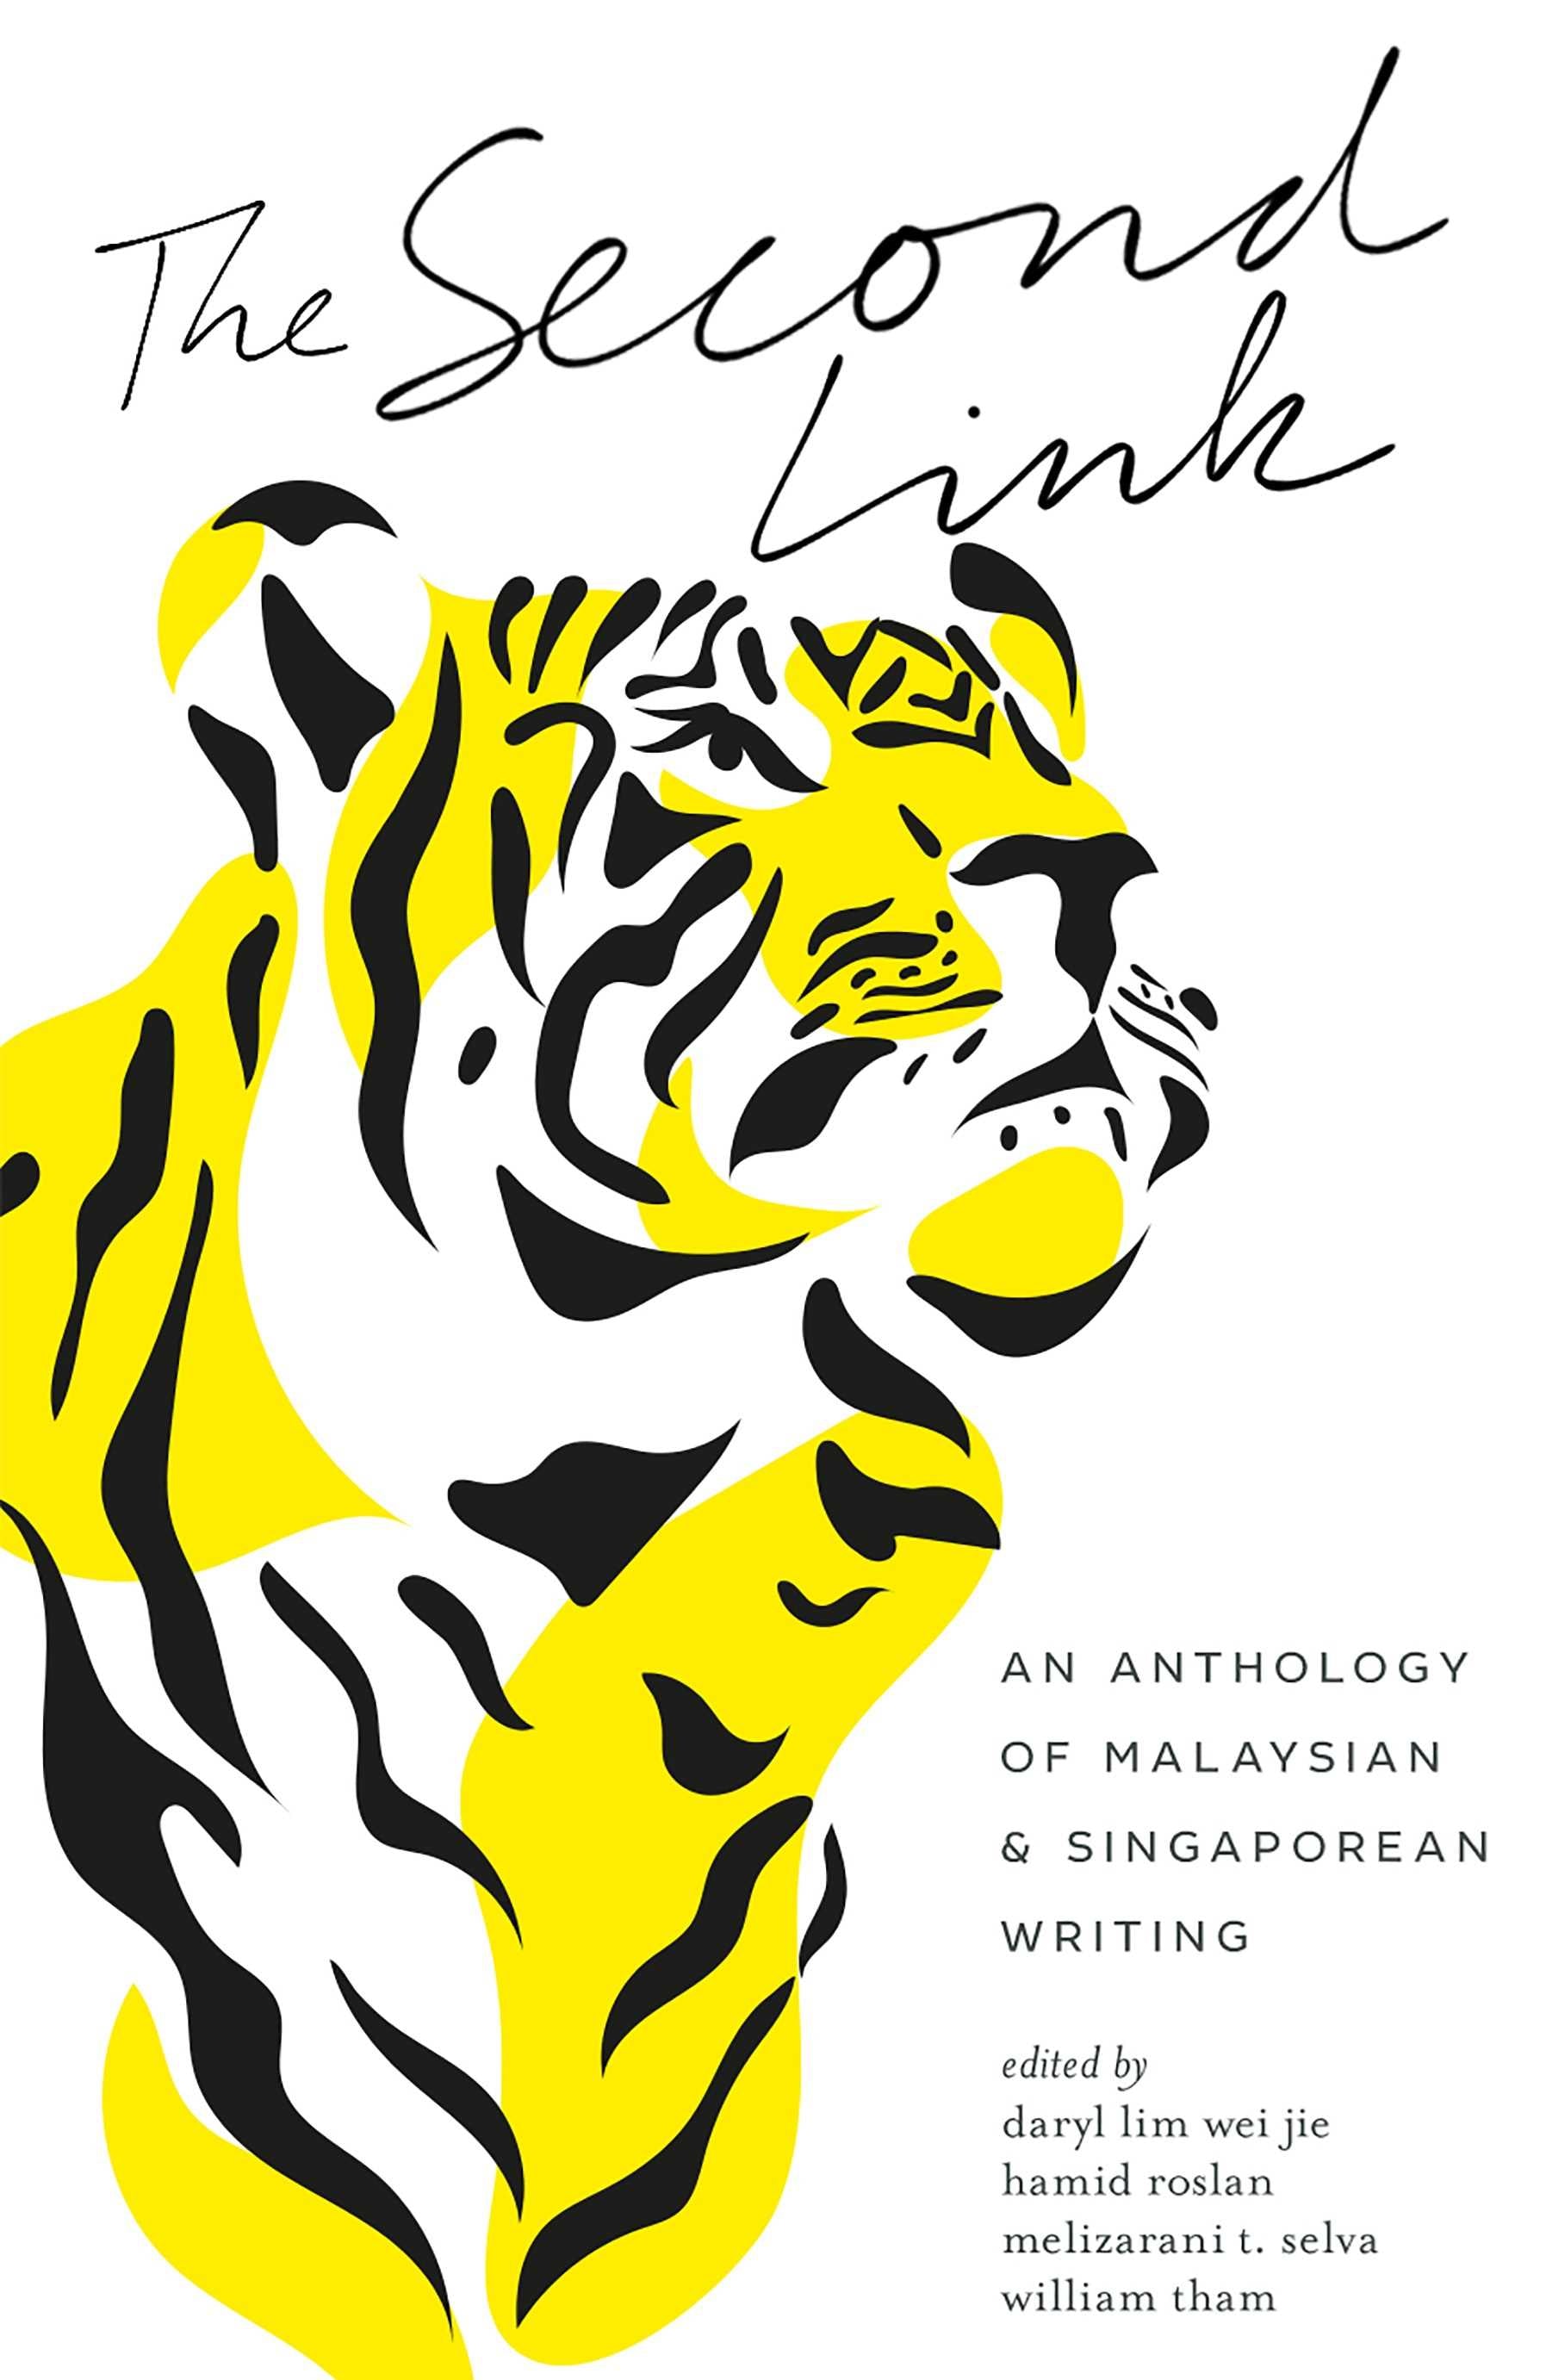 The Second Link: An Anthology of Malaysian & Singaporean Writing